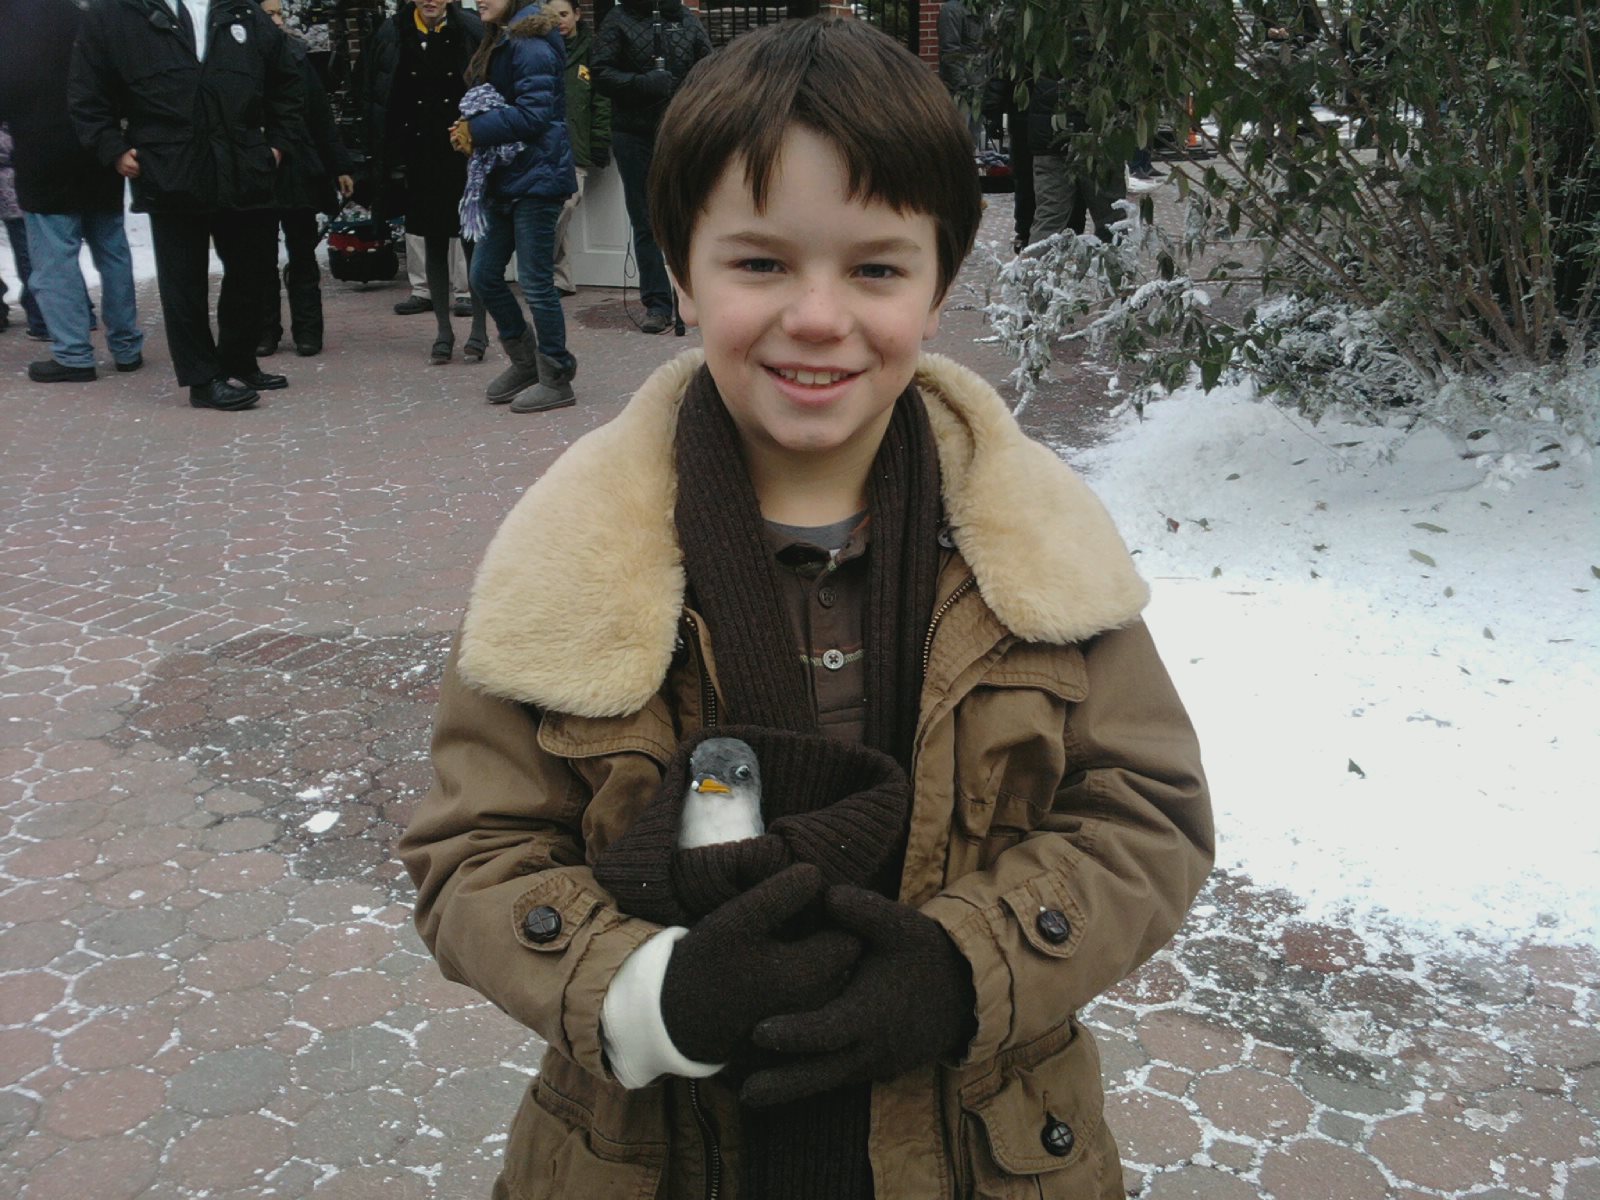 Maxwell on the set of Mr. Poppers Penguins